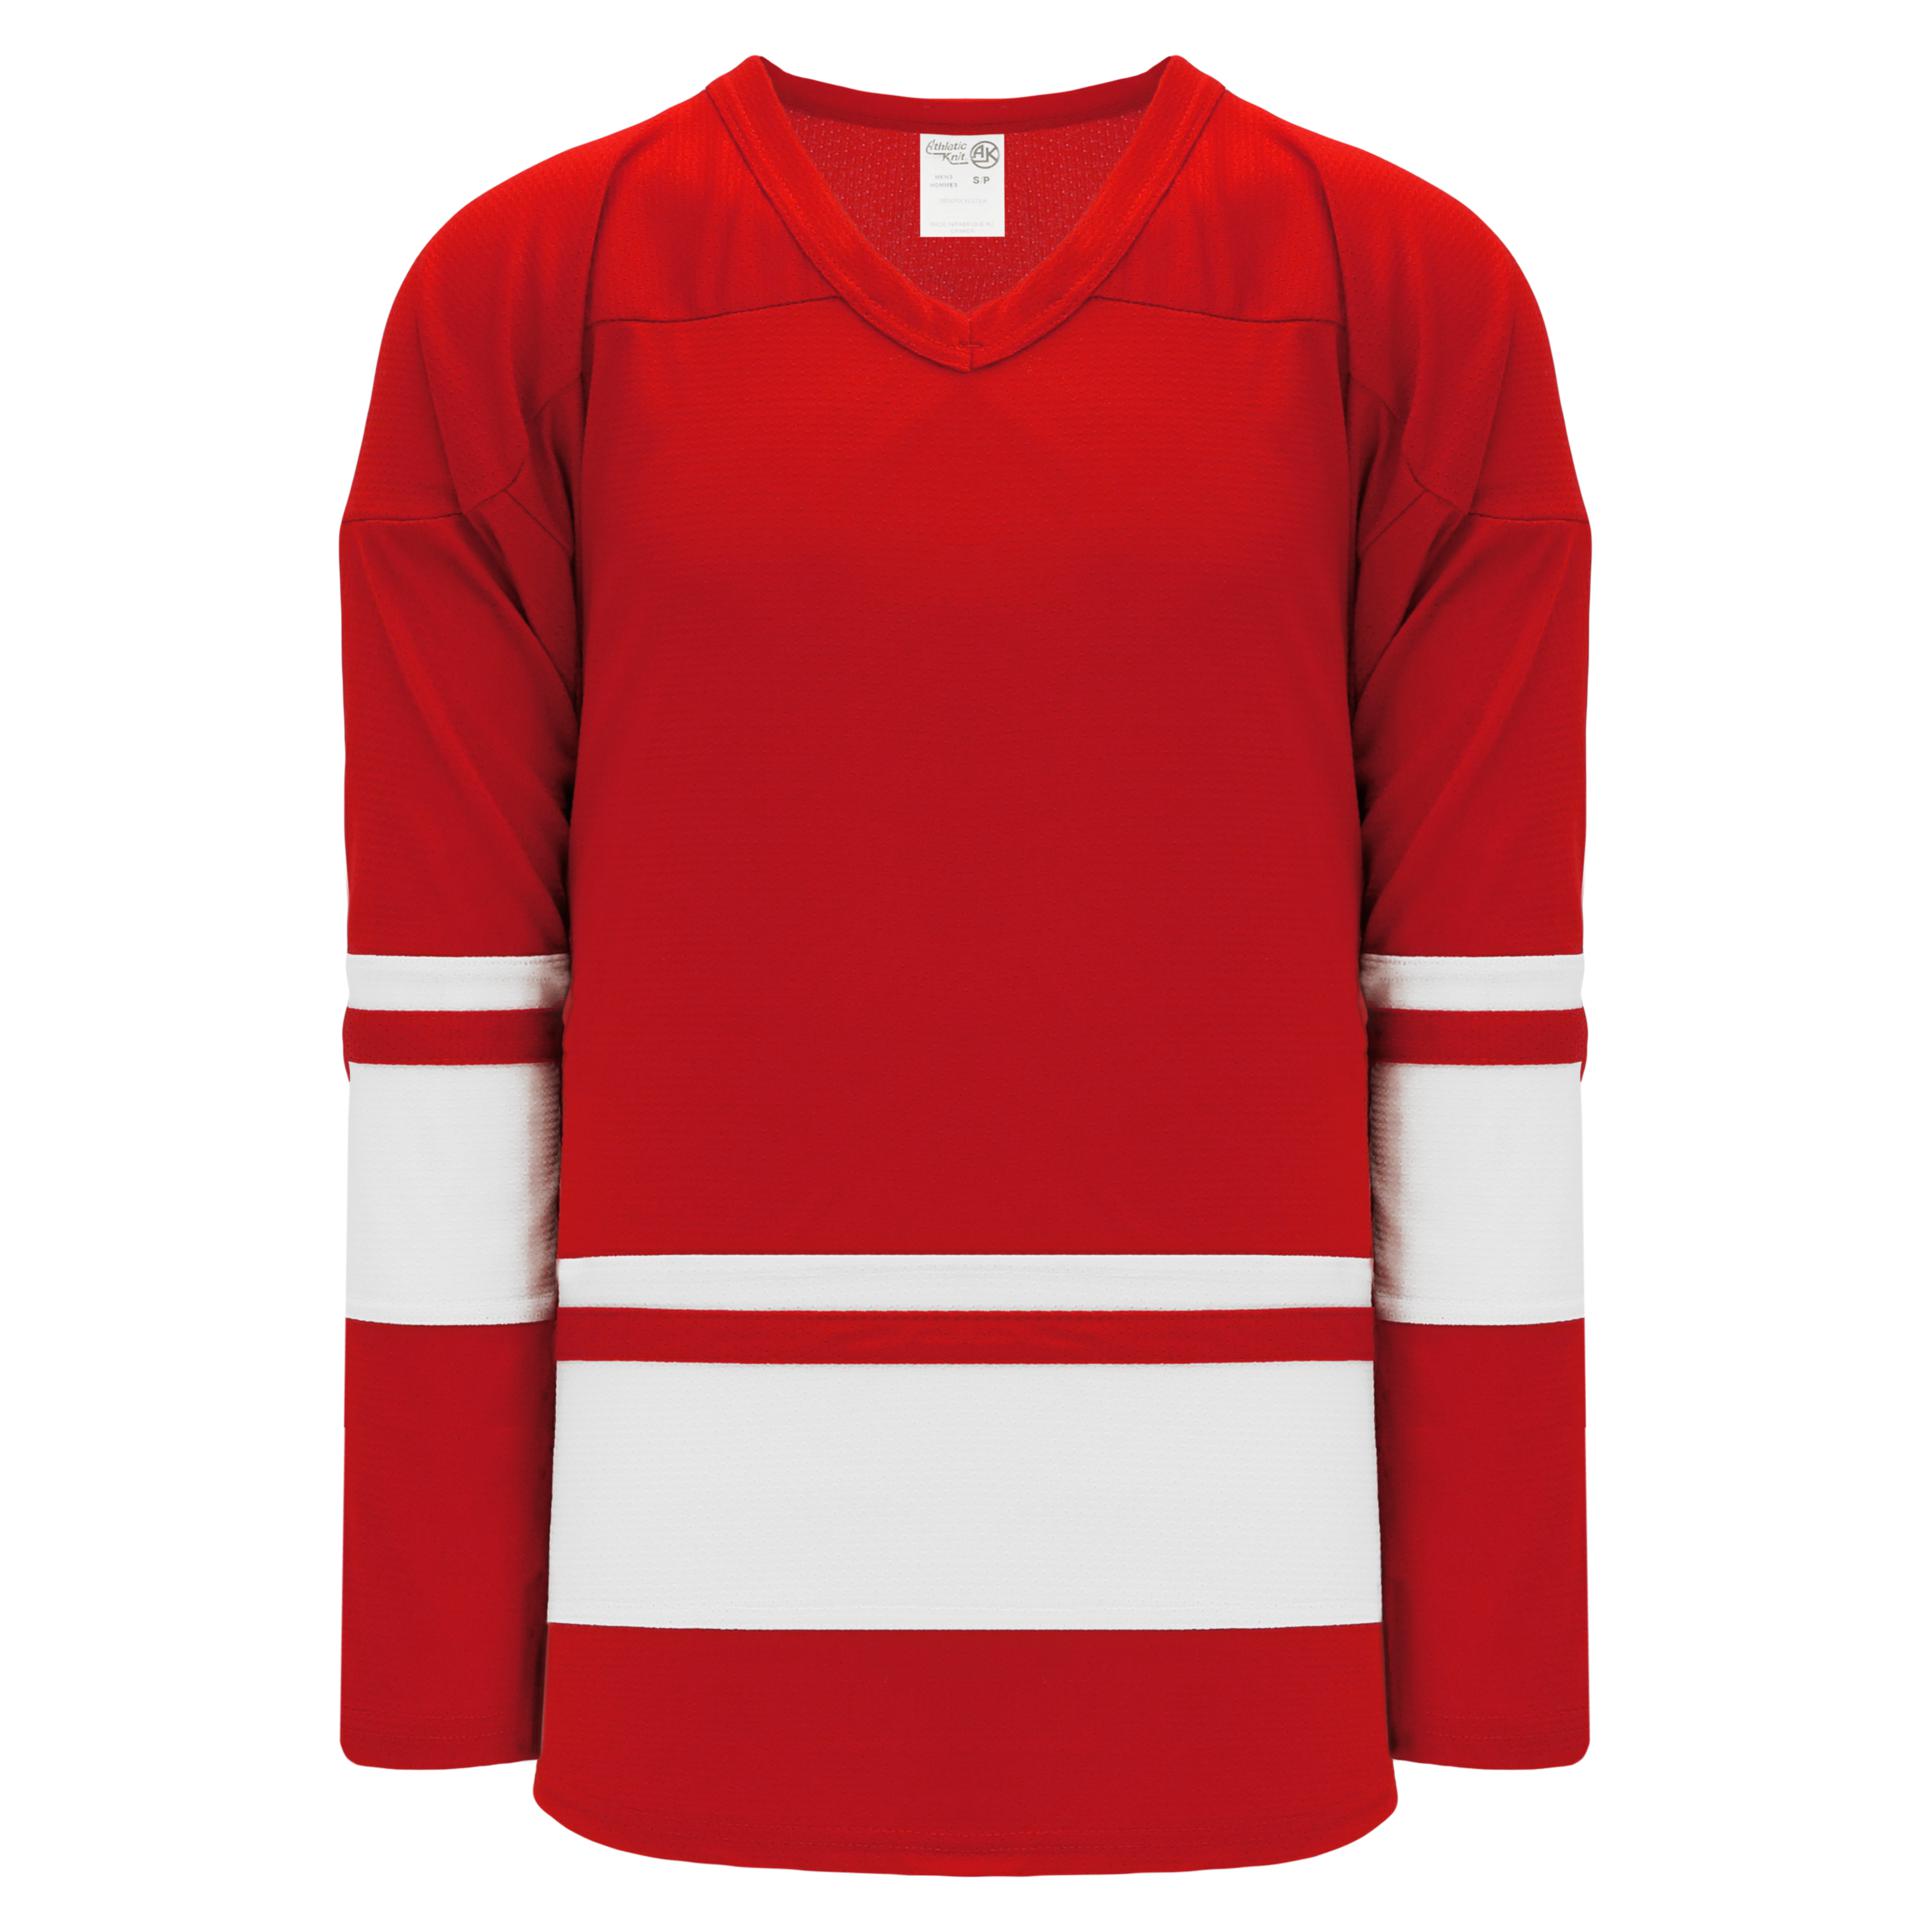 H6400-208 Red/White League Style Blank Hockey Jerseys adult Large